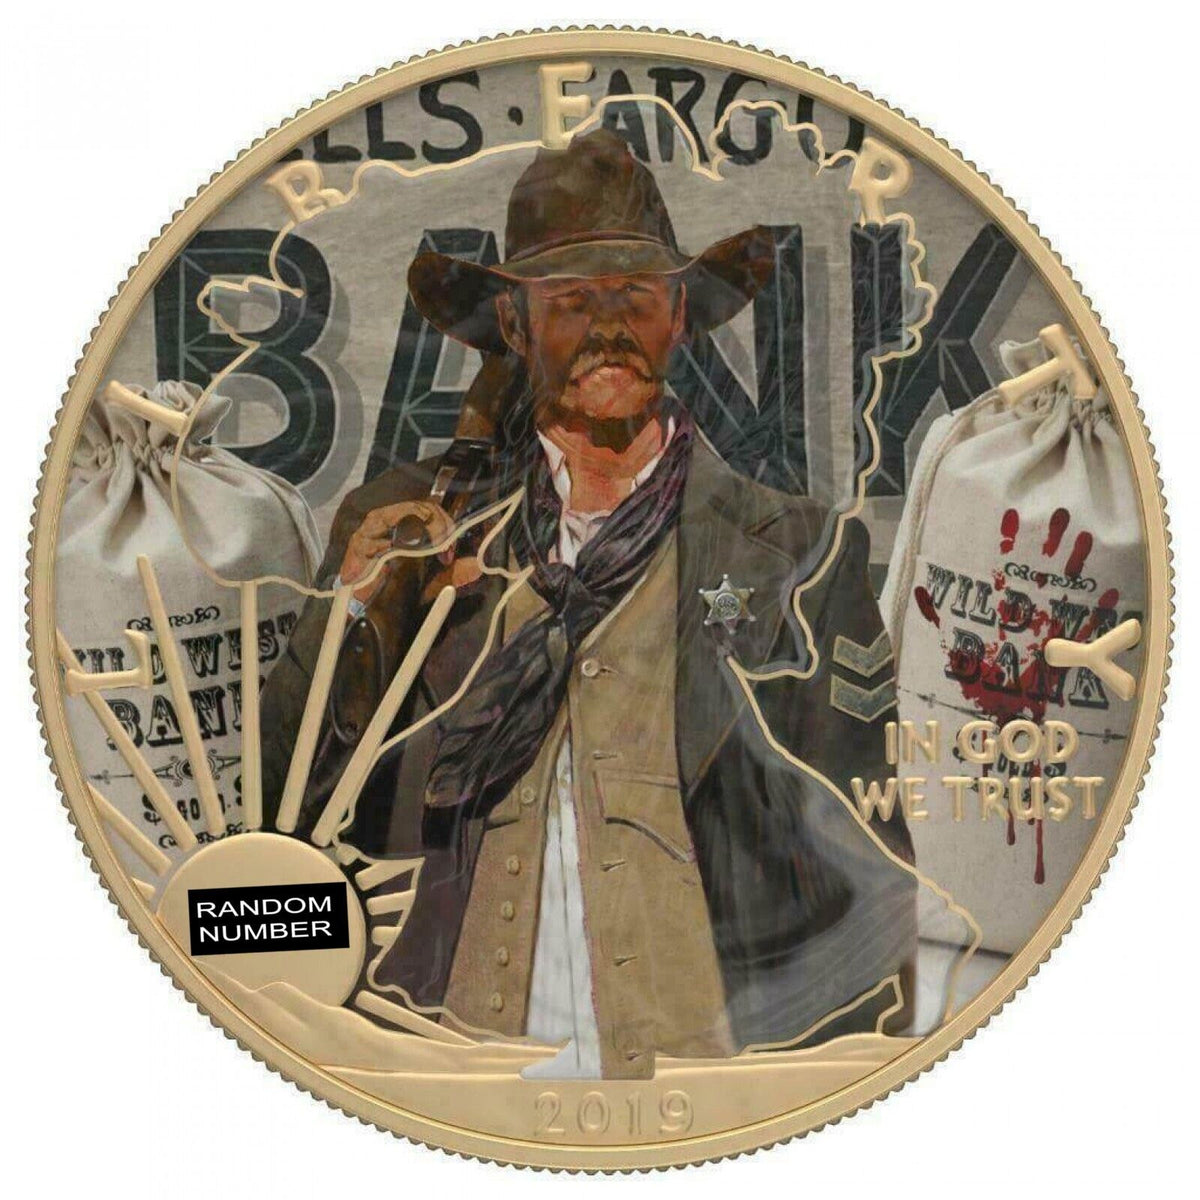 1 Oz Silver Coin 2019 $1 Liberty Faces of America Wild West Sheriff Varnish No 3-classypw.com-1